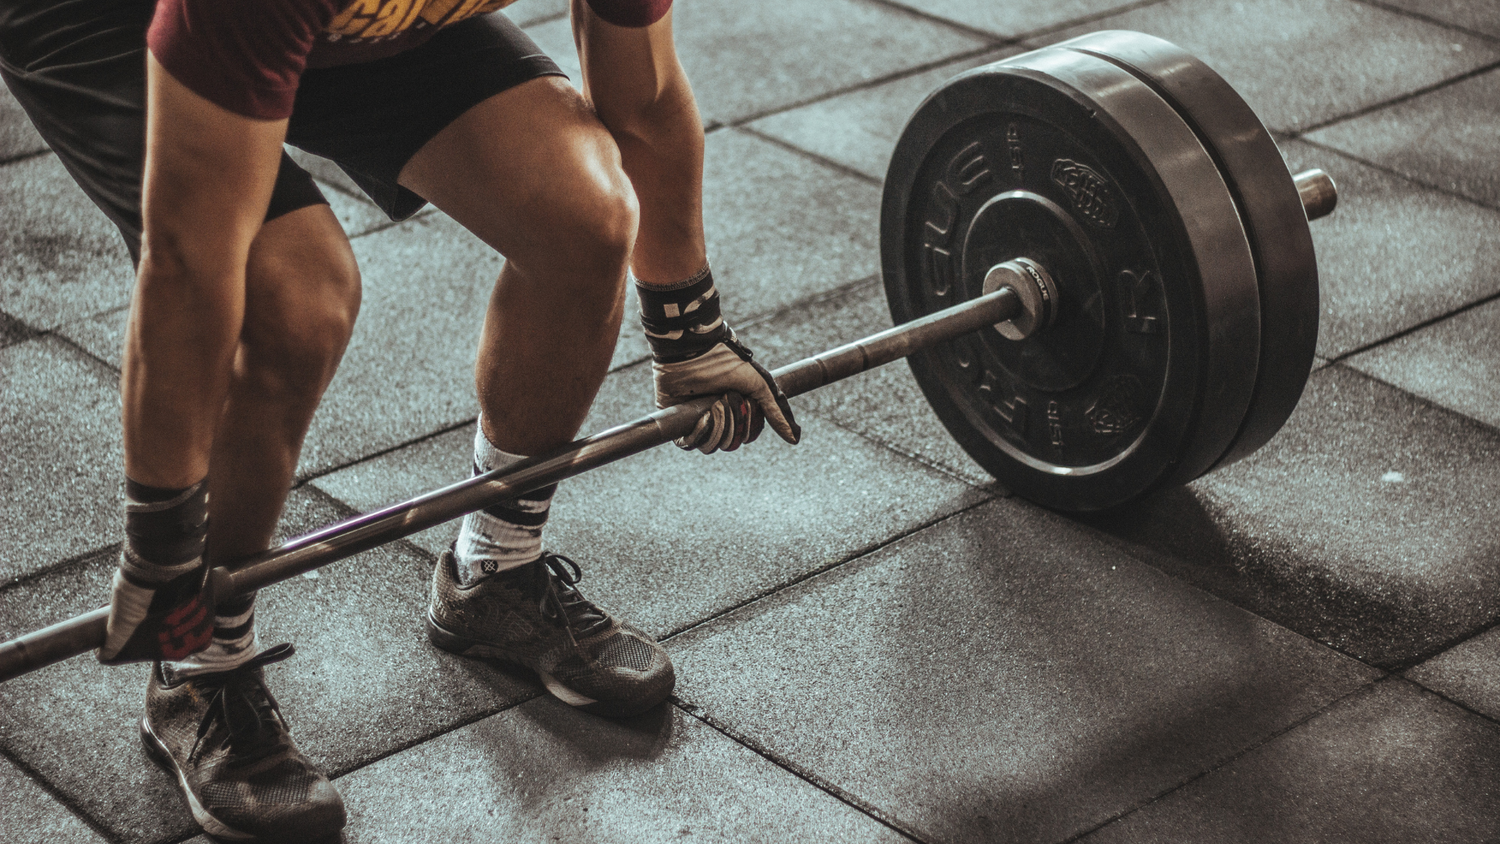 15 Ways to Work Out From Home with Barbells